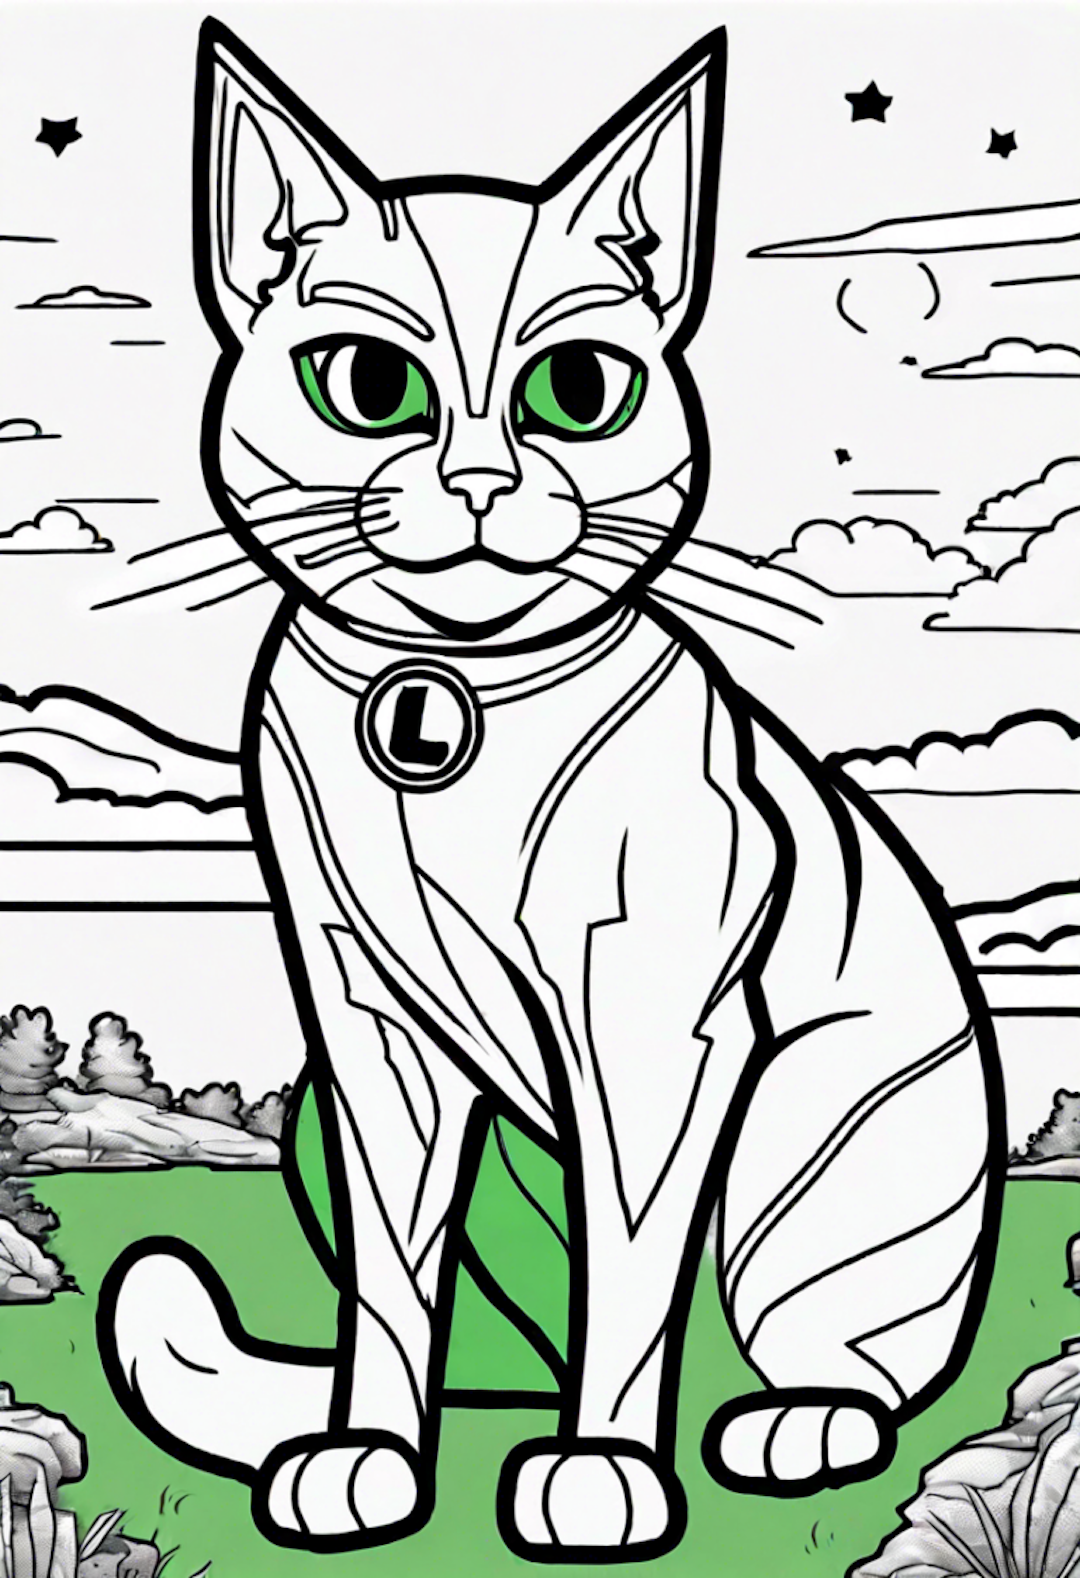 Green Lantern Cat coloring pages